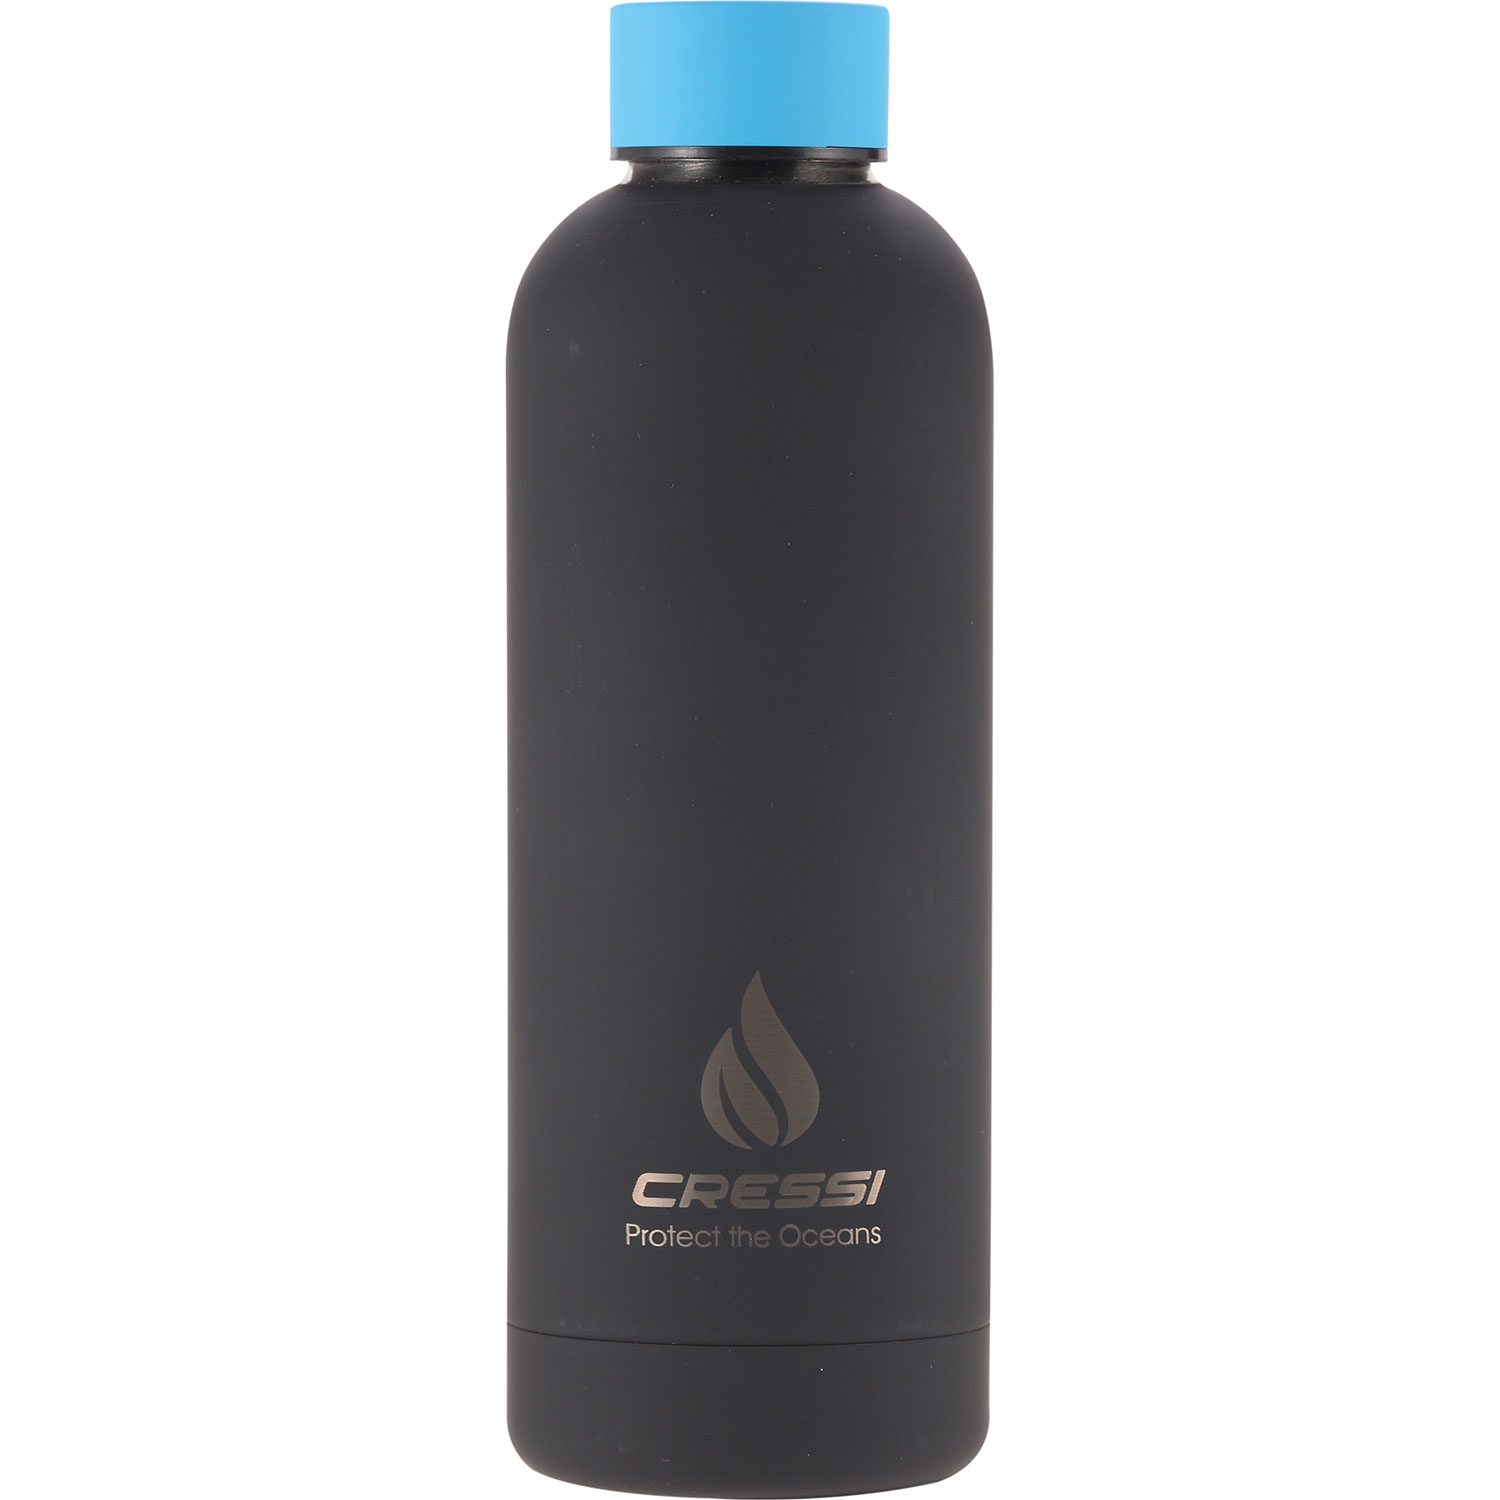 Rubber Covered Cressi Coated Flask 500 Ml Sports Thermal Bottle 